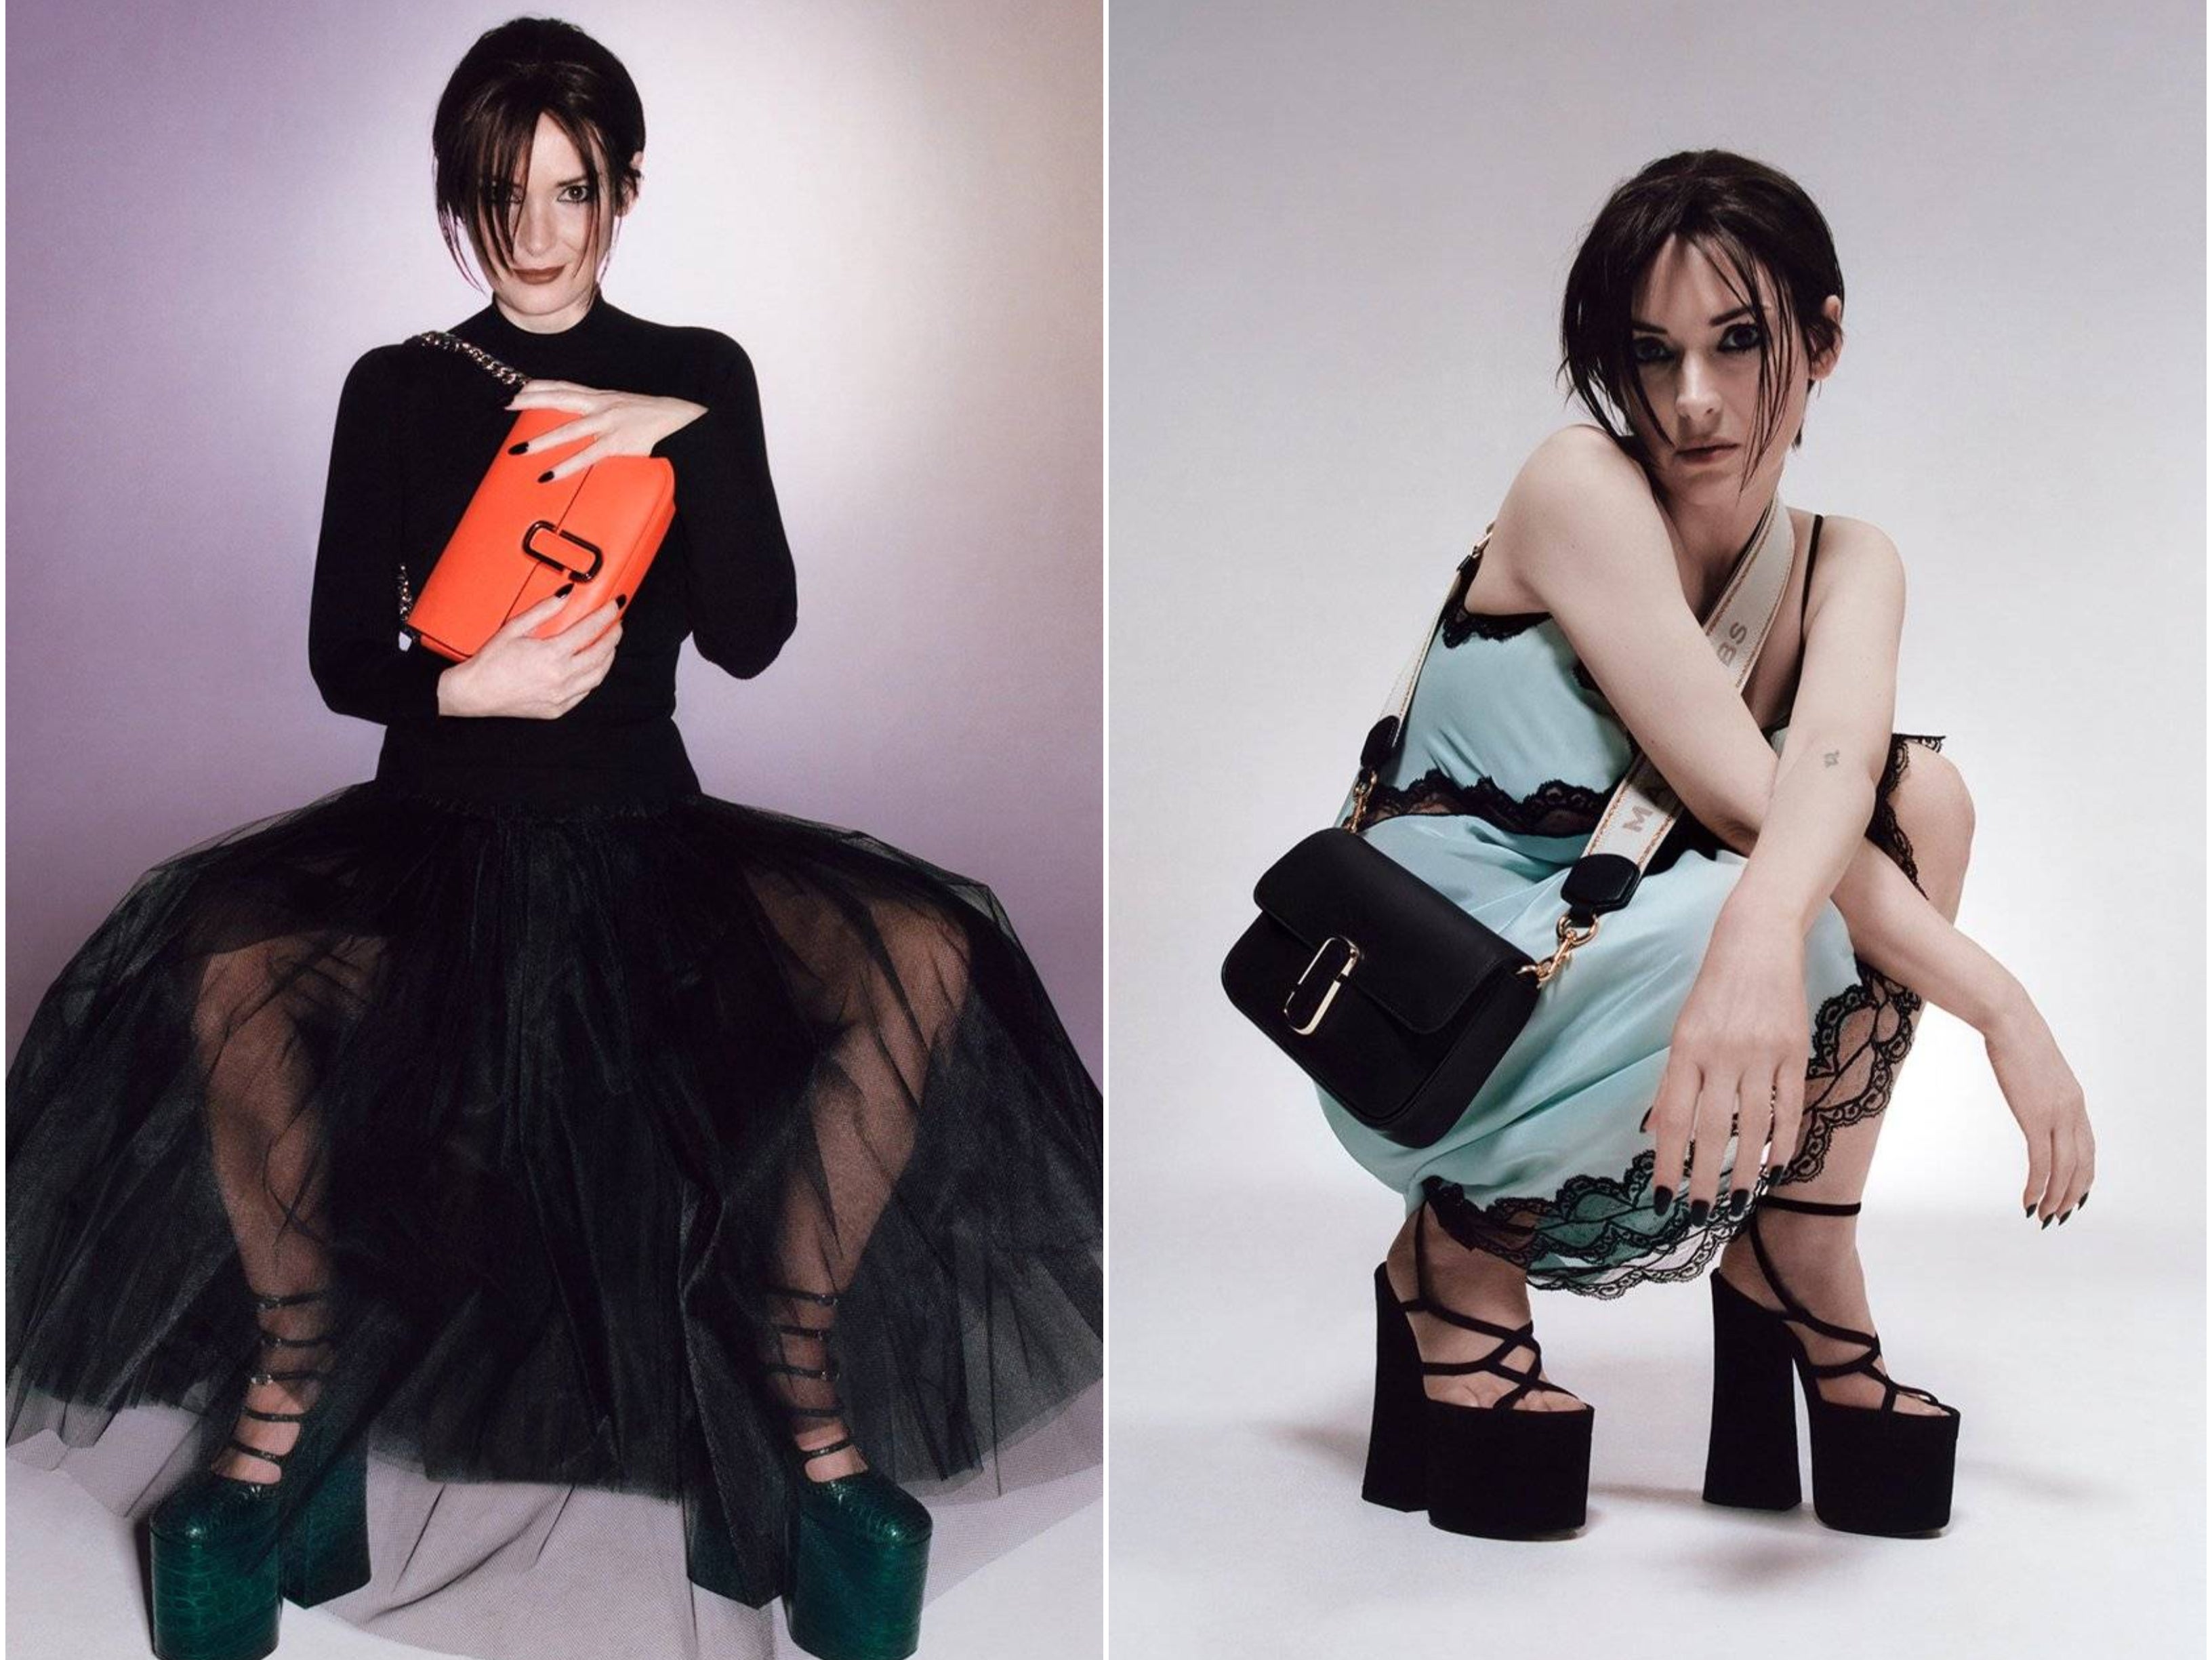 Winona Ryder is the new face of Marc Jacobs | The